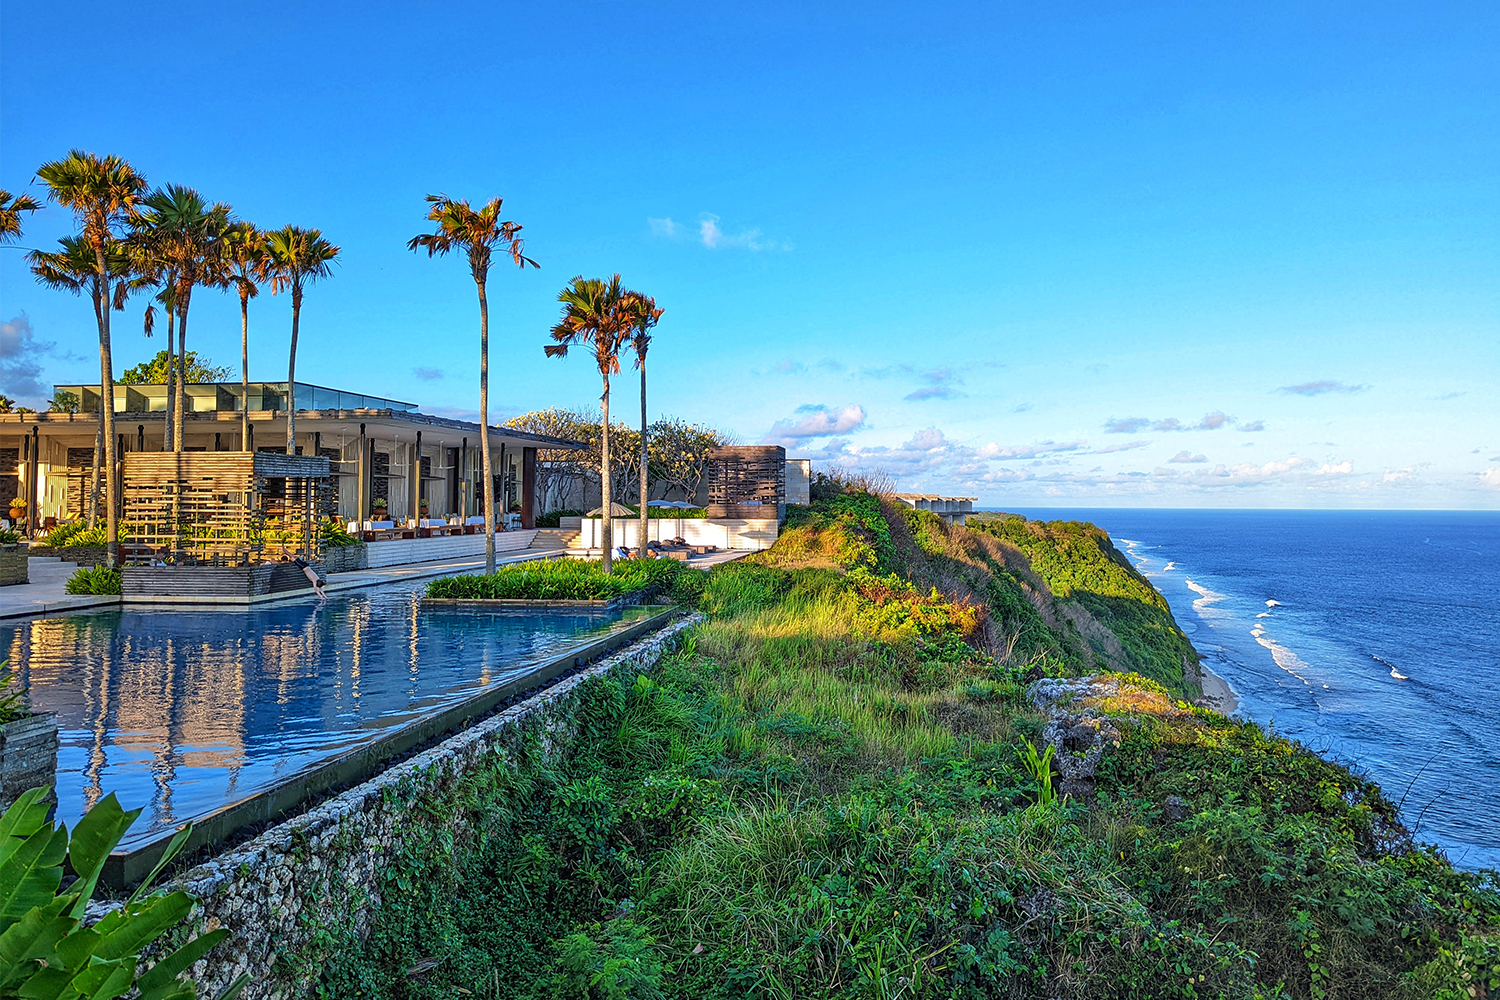 A view of the oceanside cliff at Alila Villas Uluwatu in Bali, Indonesia